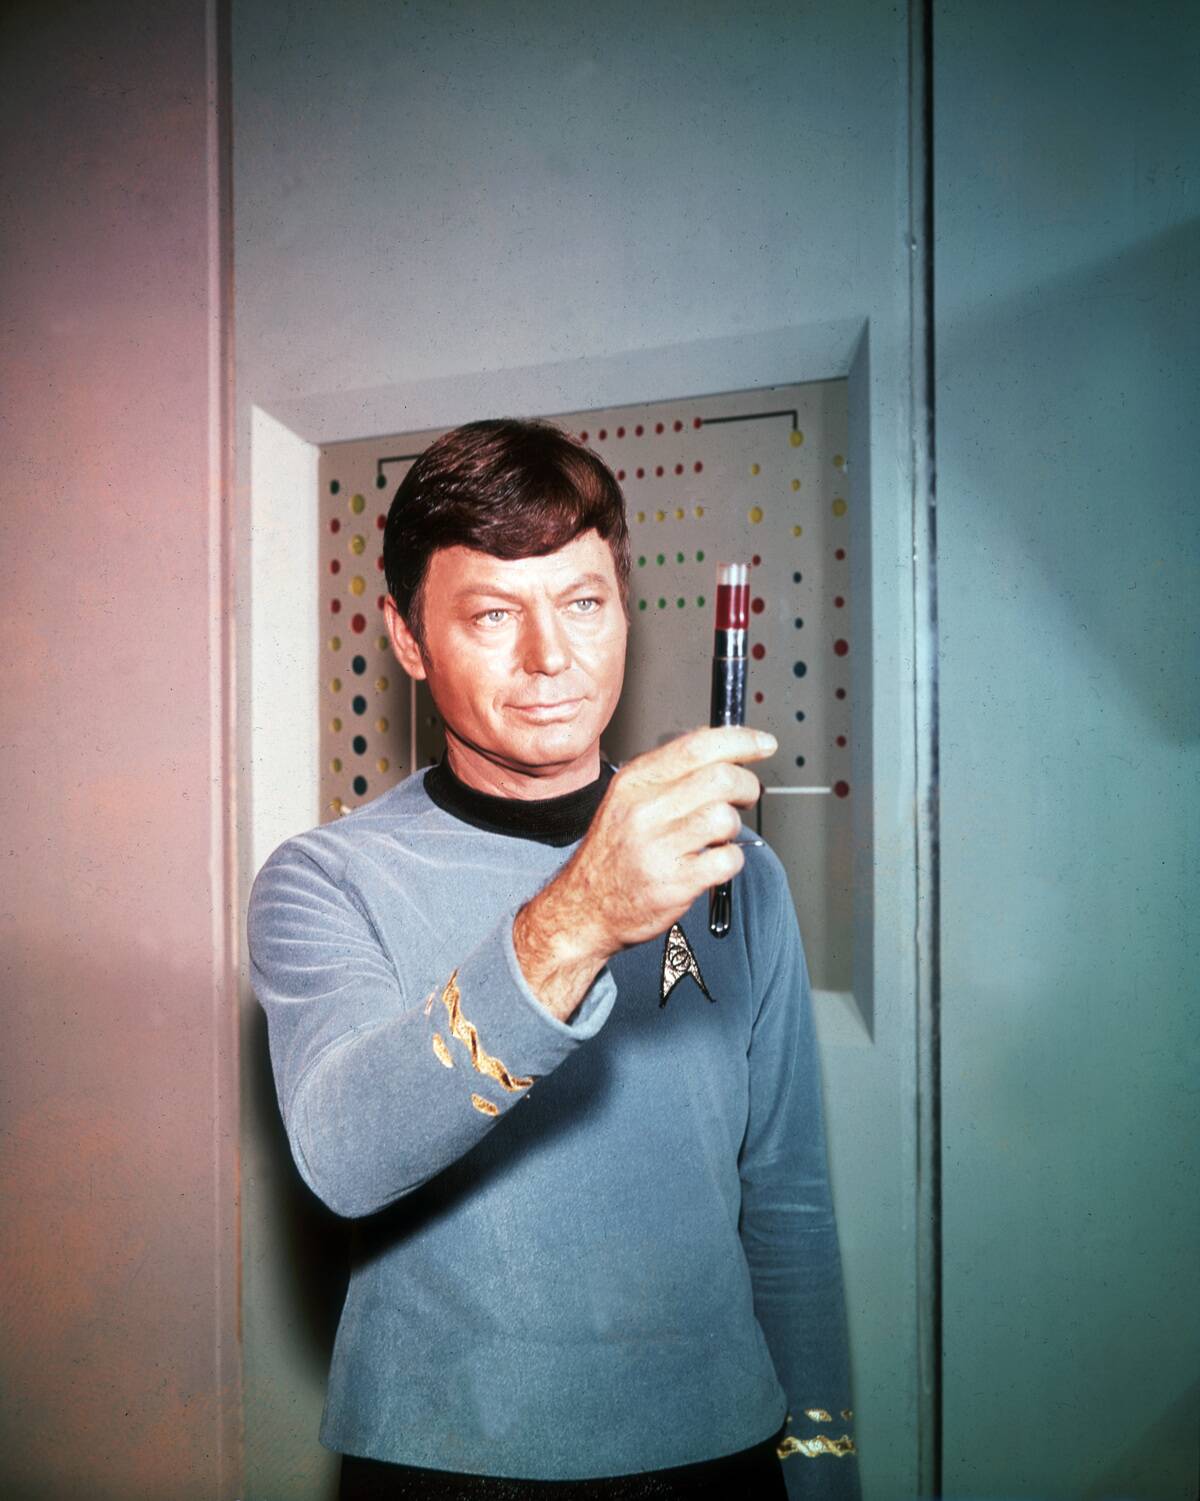 <p>The line "I'm a doctor, not a..." originates from the 1933 film <i>The Kennel Murder Case</i>. It was later popularized in the <i>Star Trek</i> series and became a recurring catchphrase uttered by Dr. Leonard "Bones" McCoy, who would say the line when he was frustrated about being asked to do more than he could. </p> <p>The line was often completed with different endings, emphasizing the doctor's dedication to his medical profession.</p>